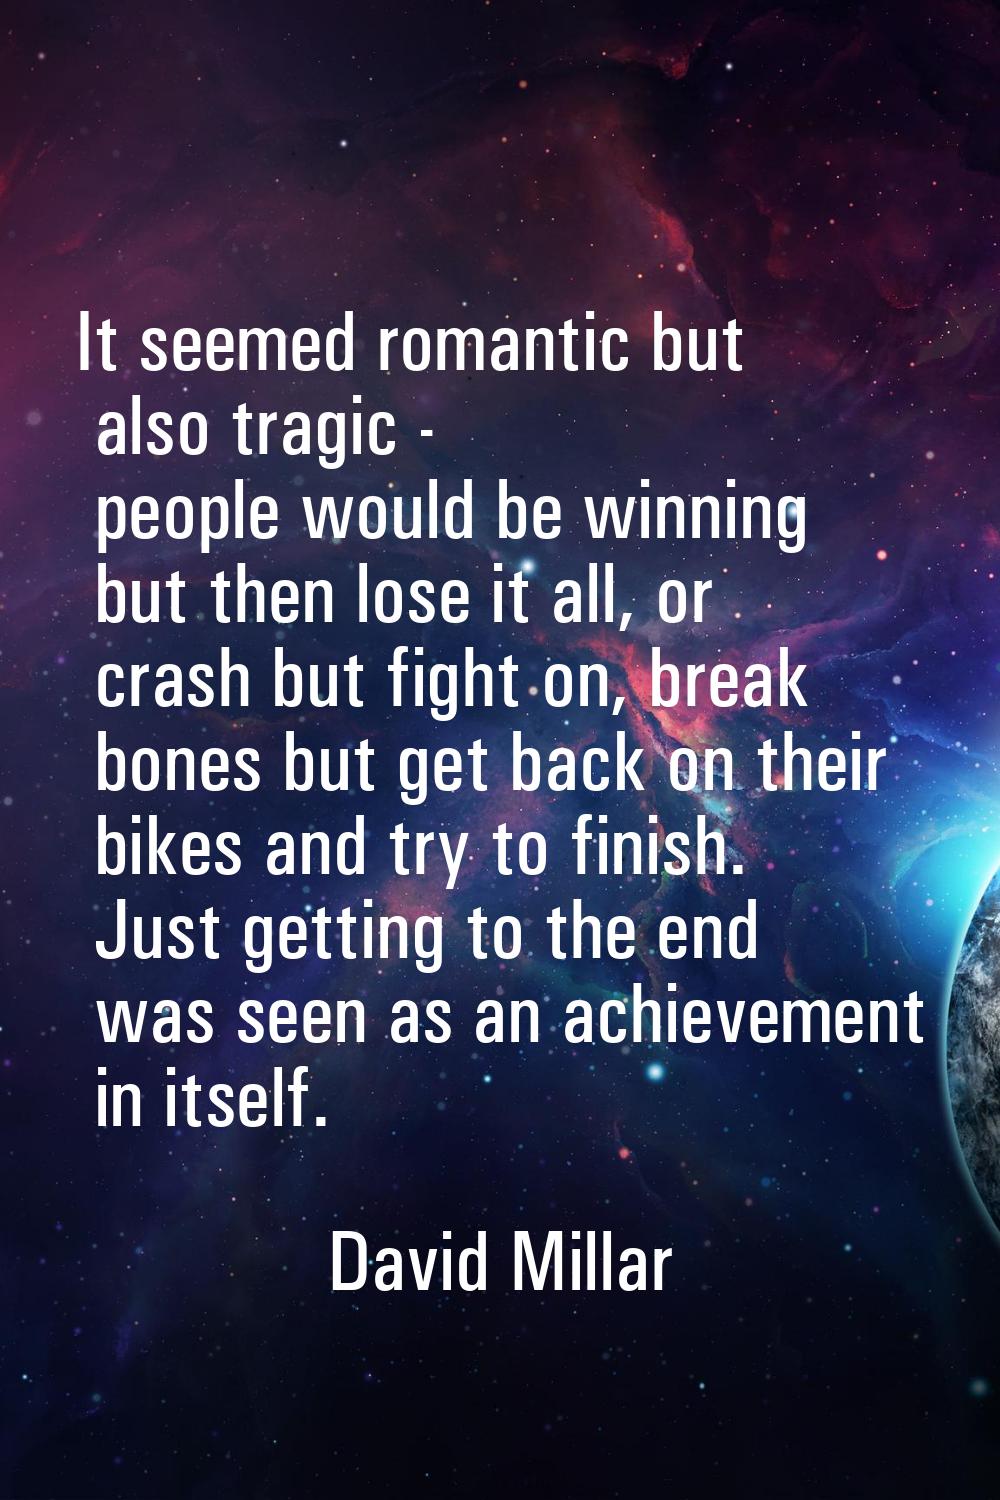 It seemed romantic but also tragic - people would be winning but then lose it all, or crash but fig